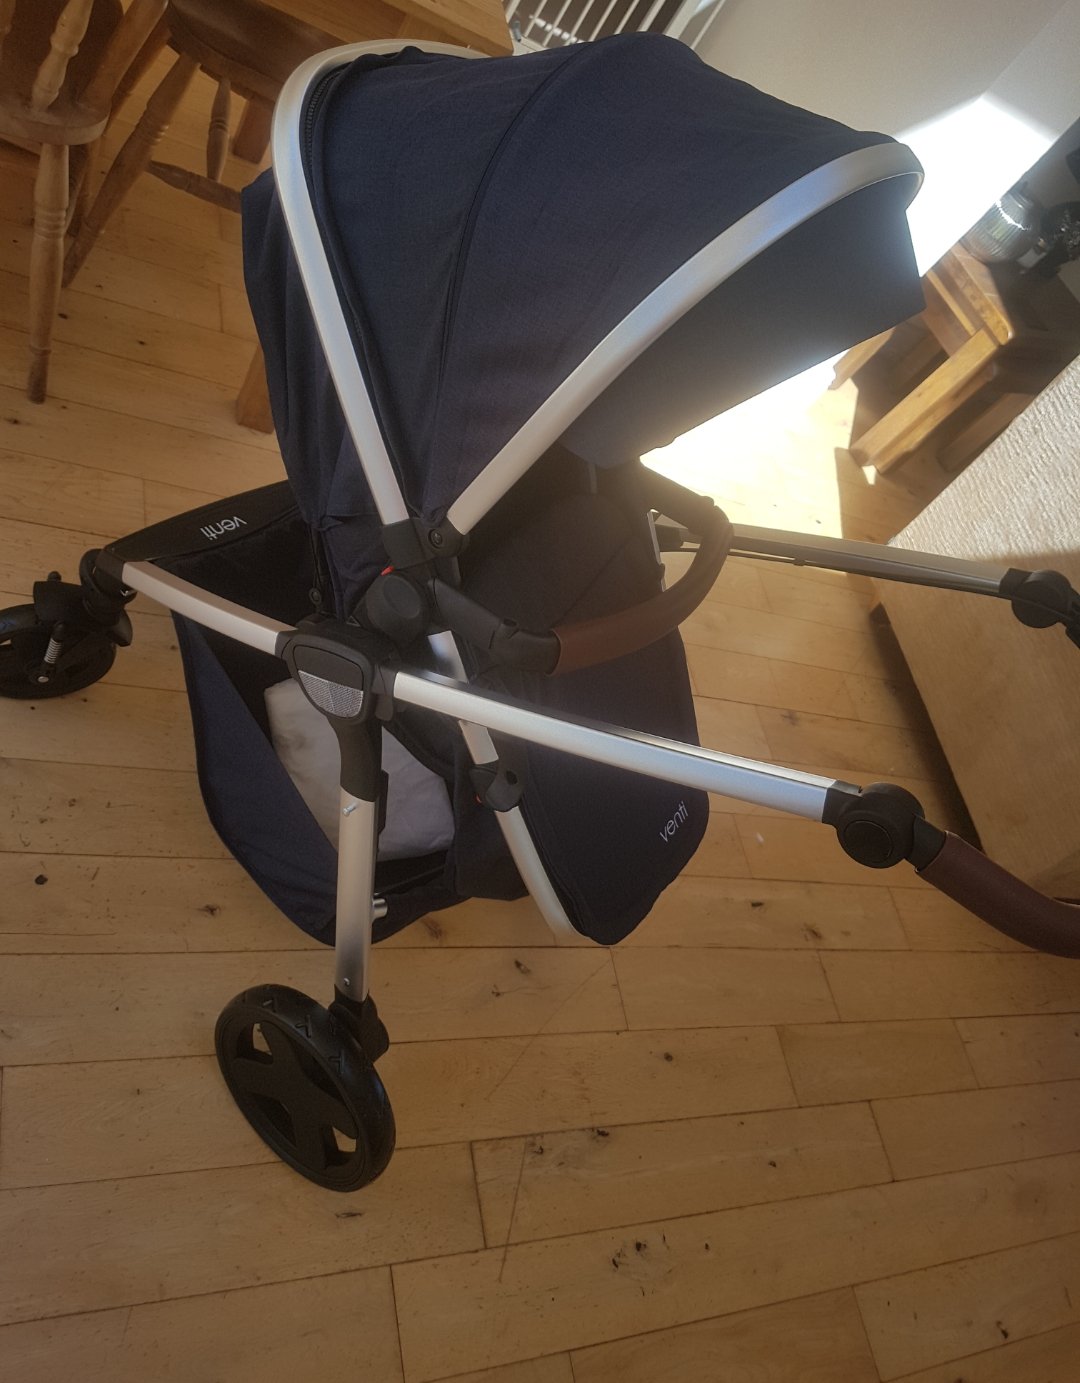 baby elegance venti complete travel system